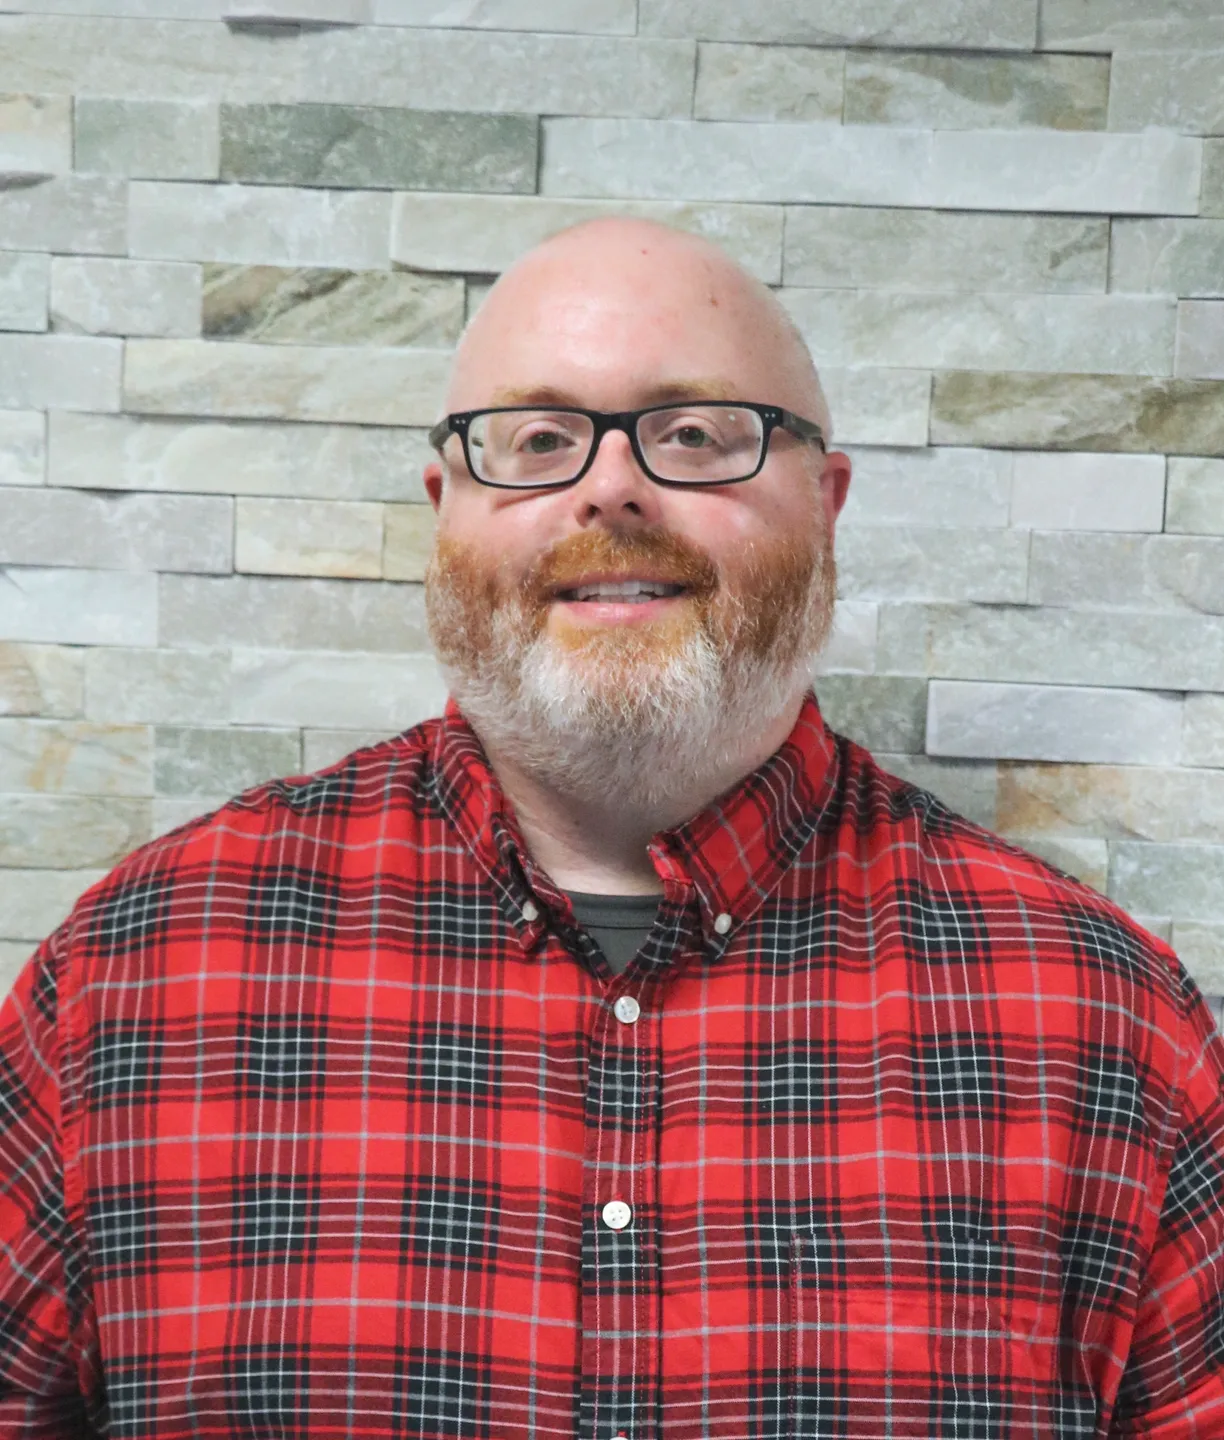 A bald man in a red plaid shirt standing in front of a stone wall.